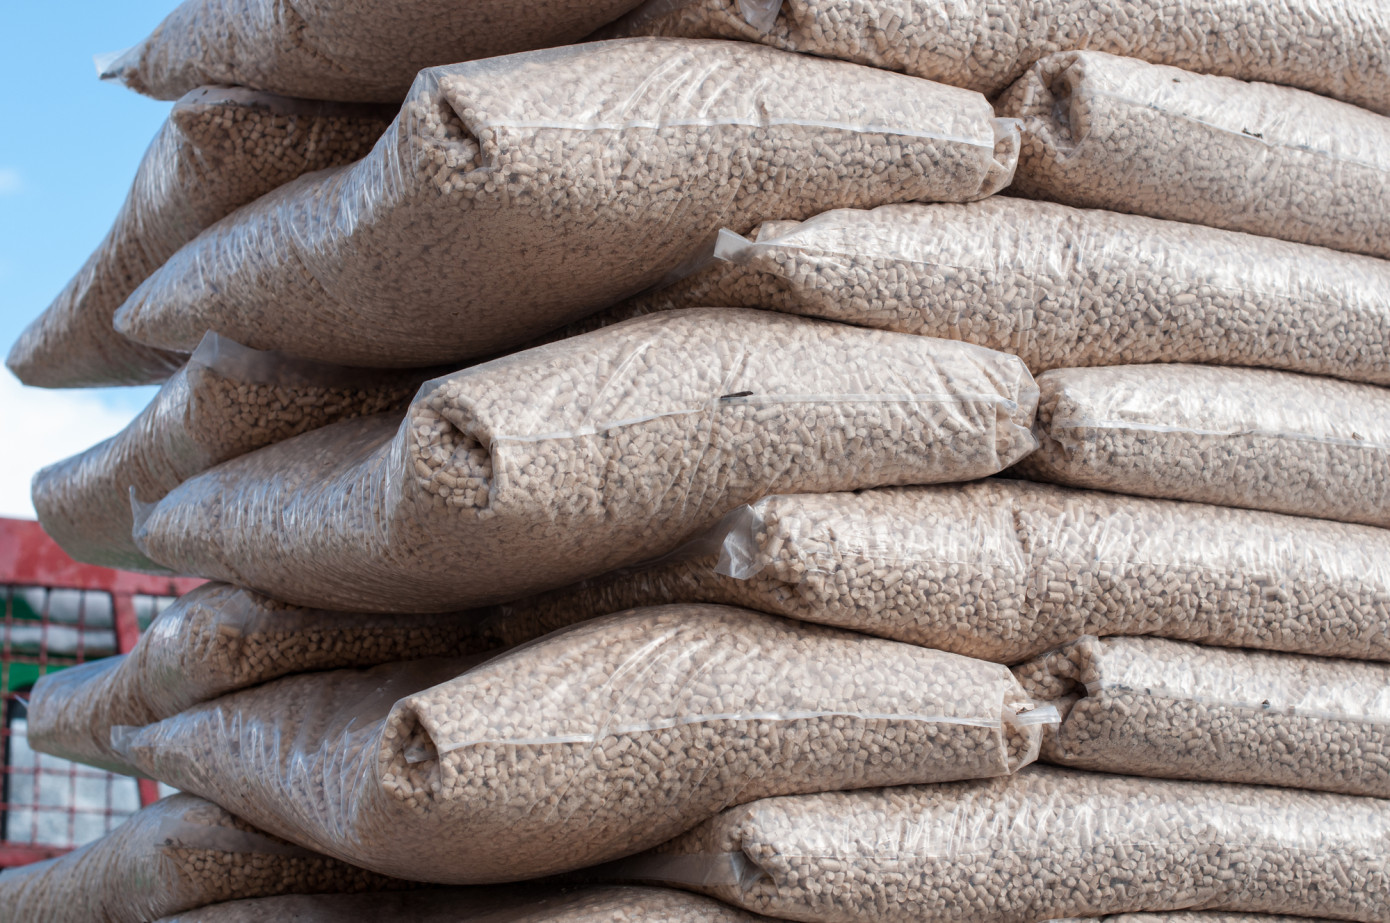 In January, price for wood pellets exported from U.S. rises 5%